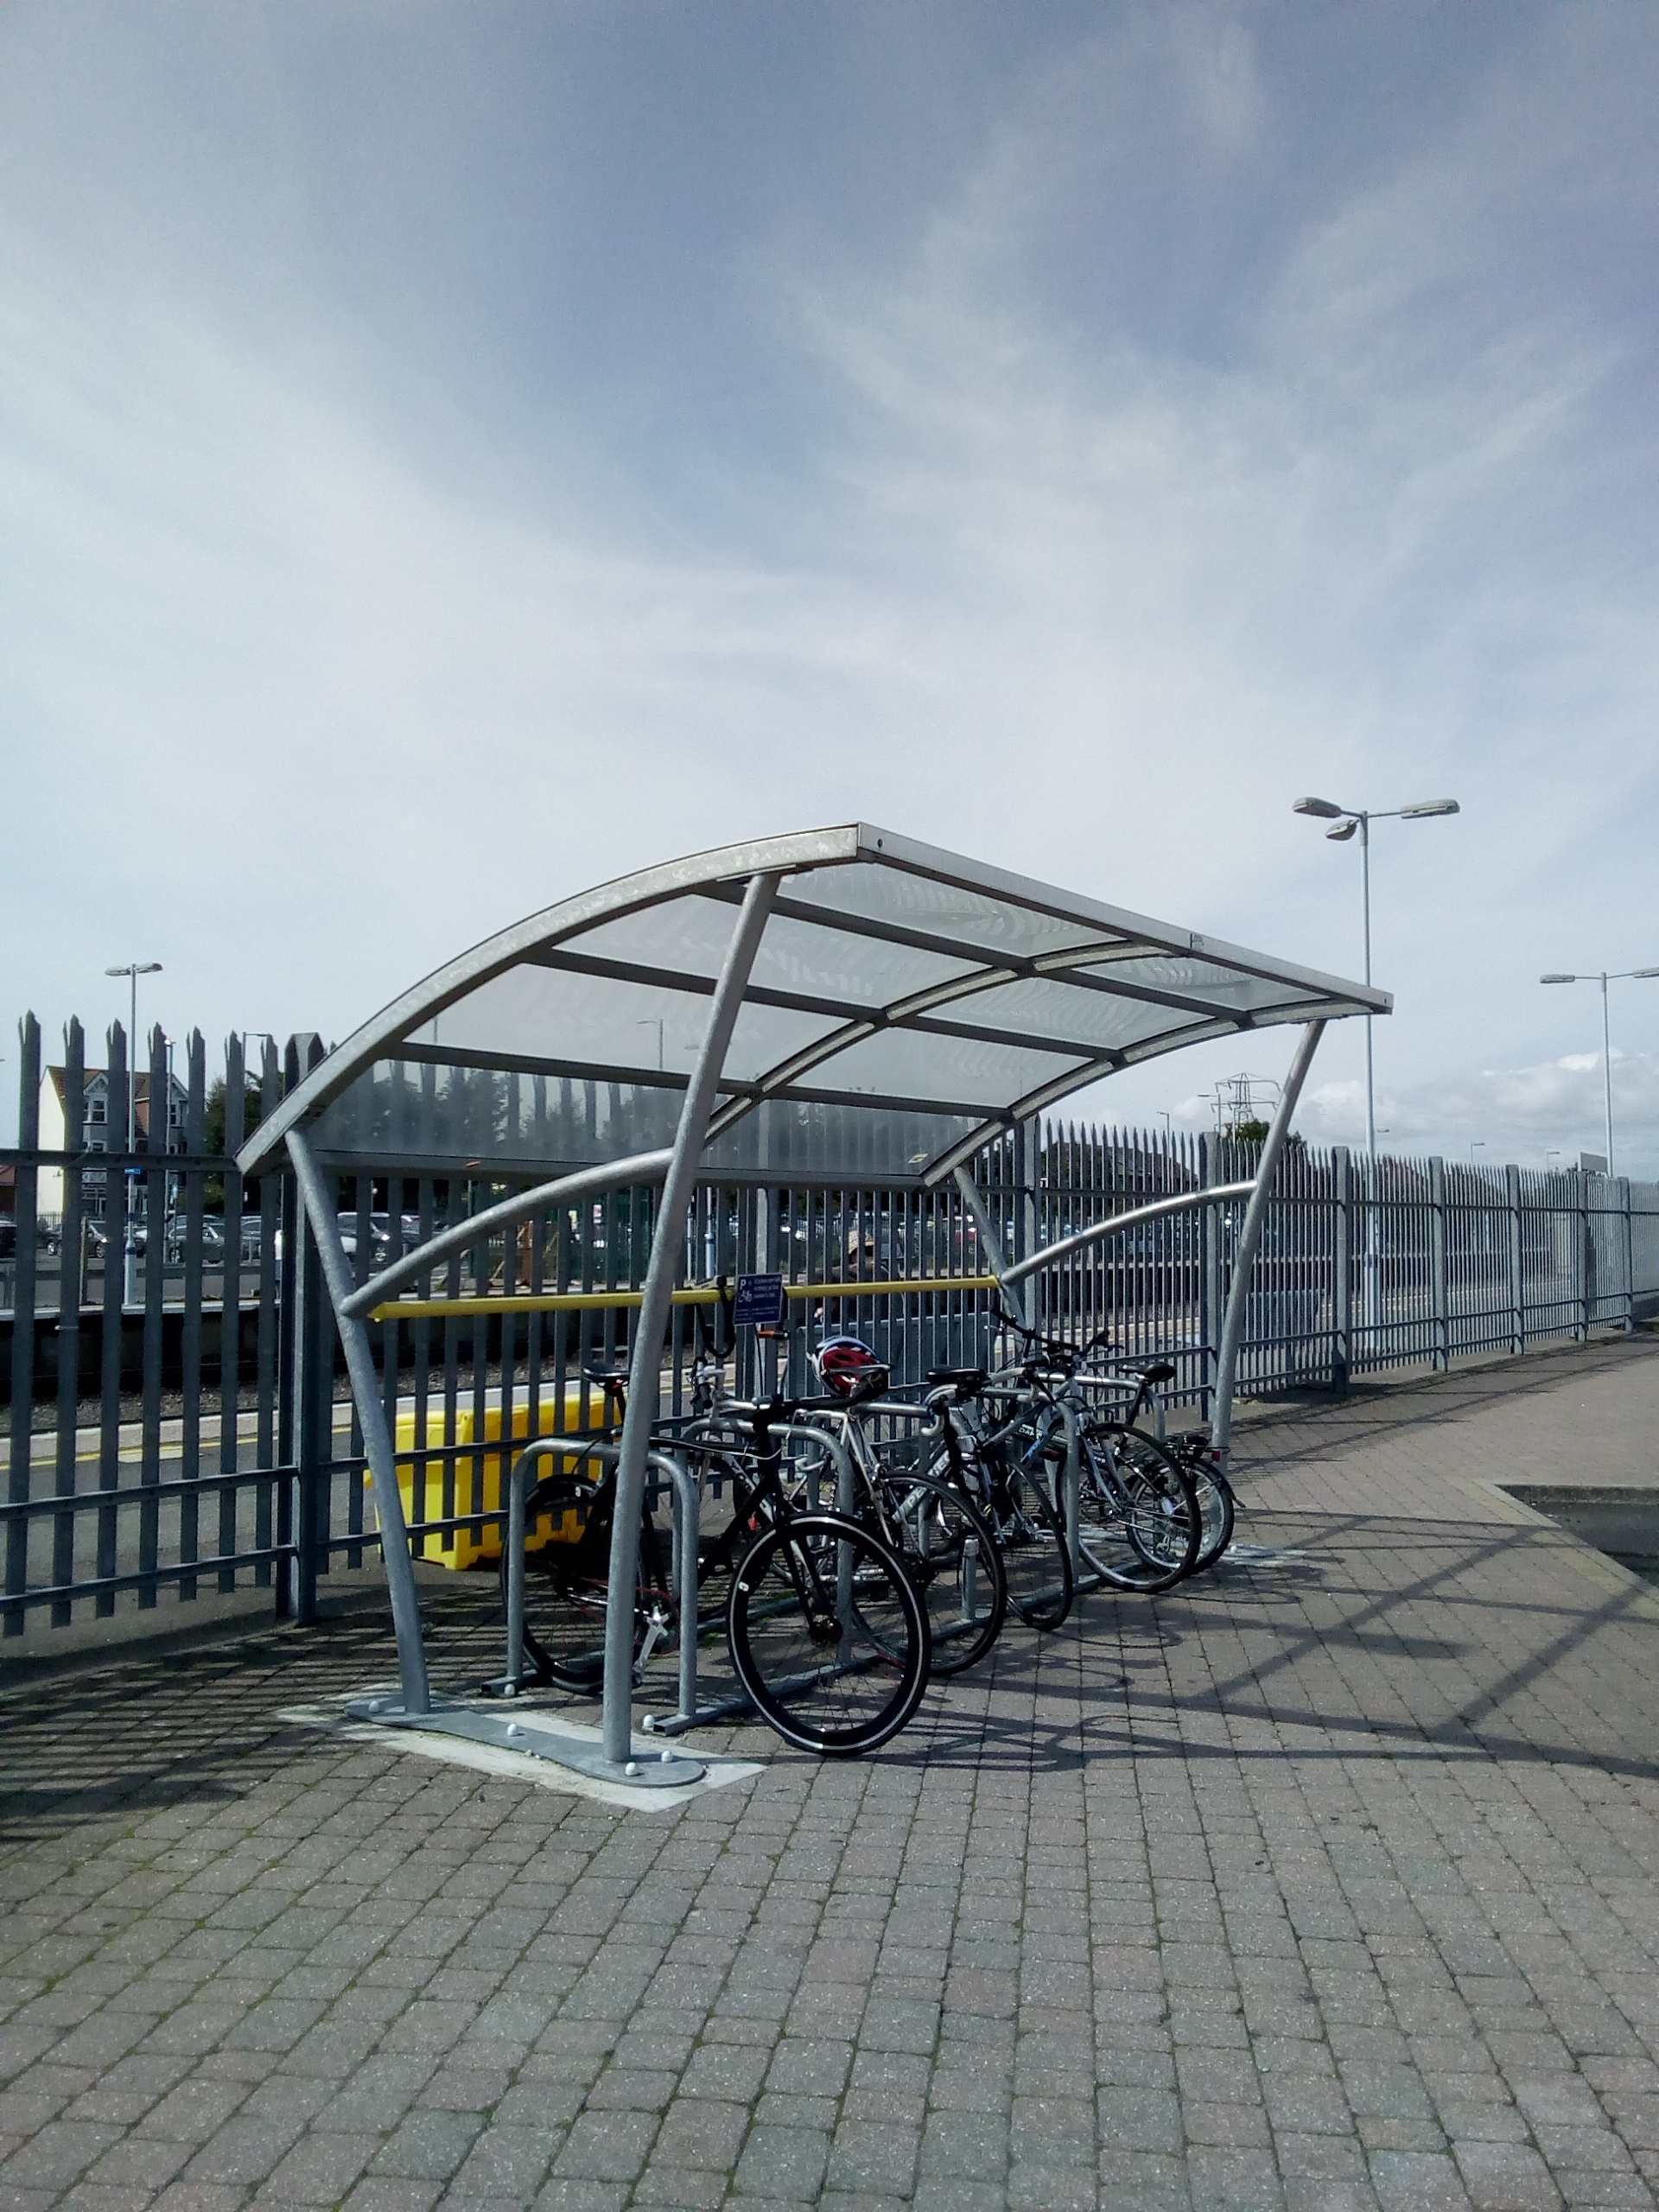 Cycle stand on Cheriton side of line at Folkestone West station